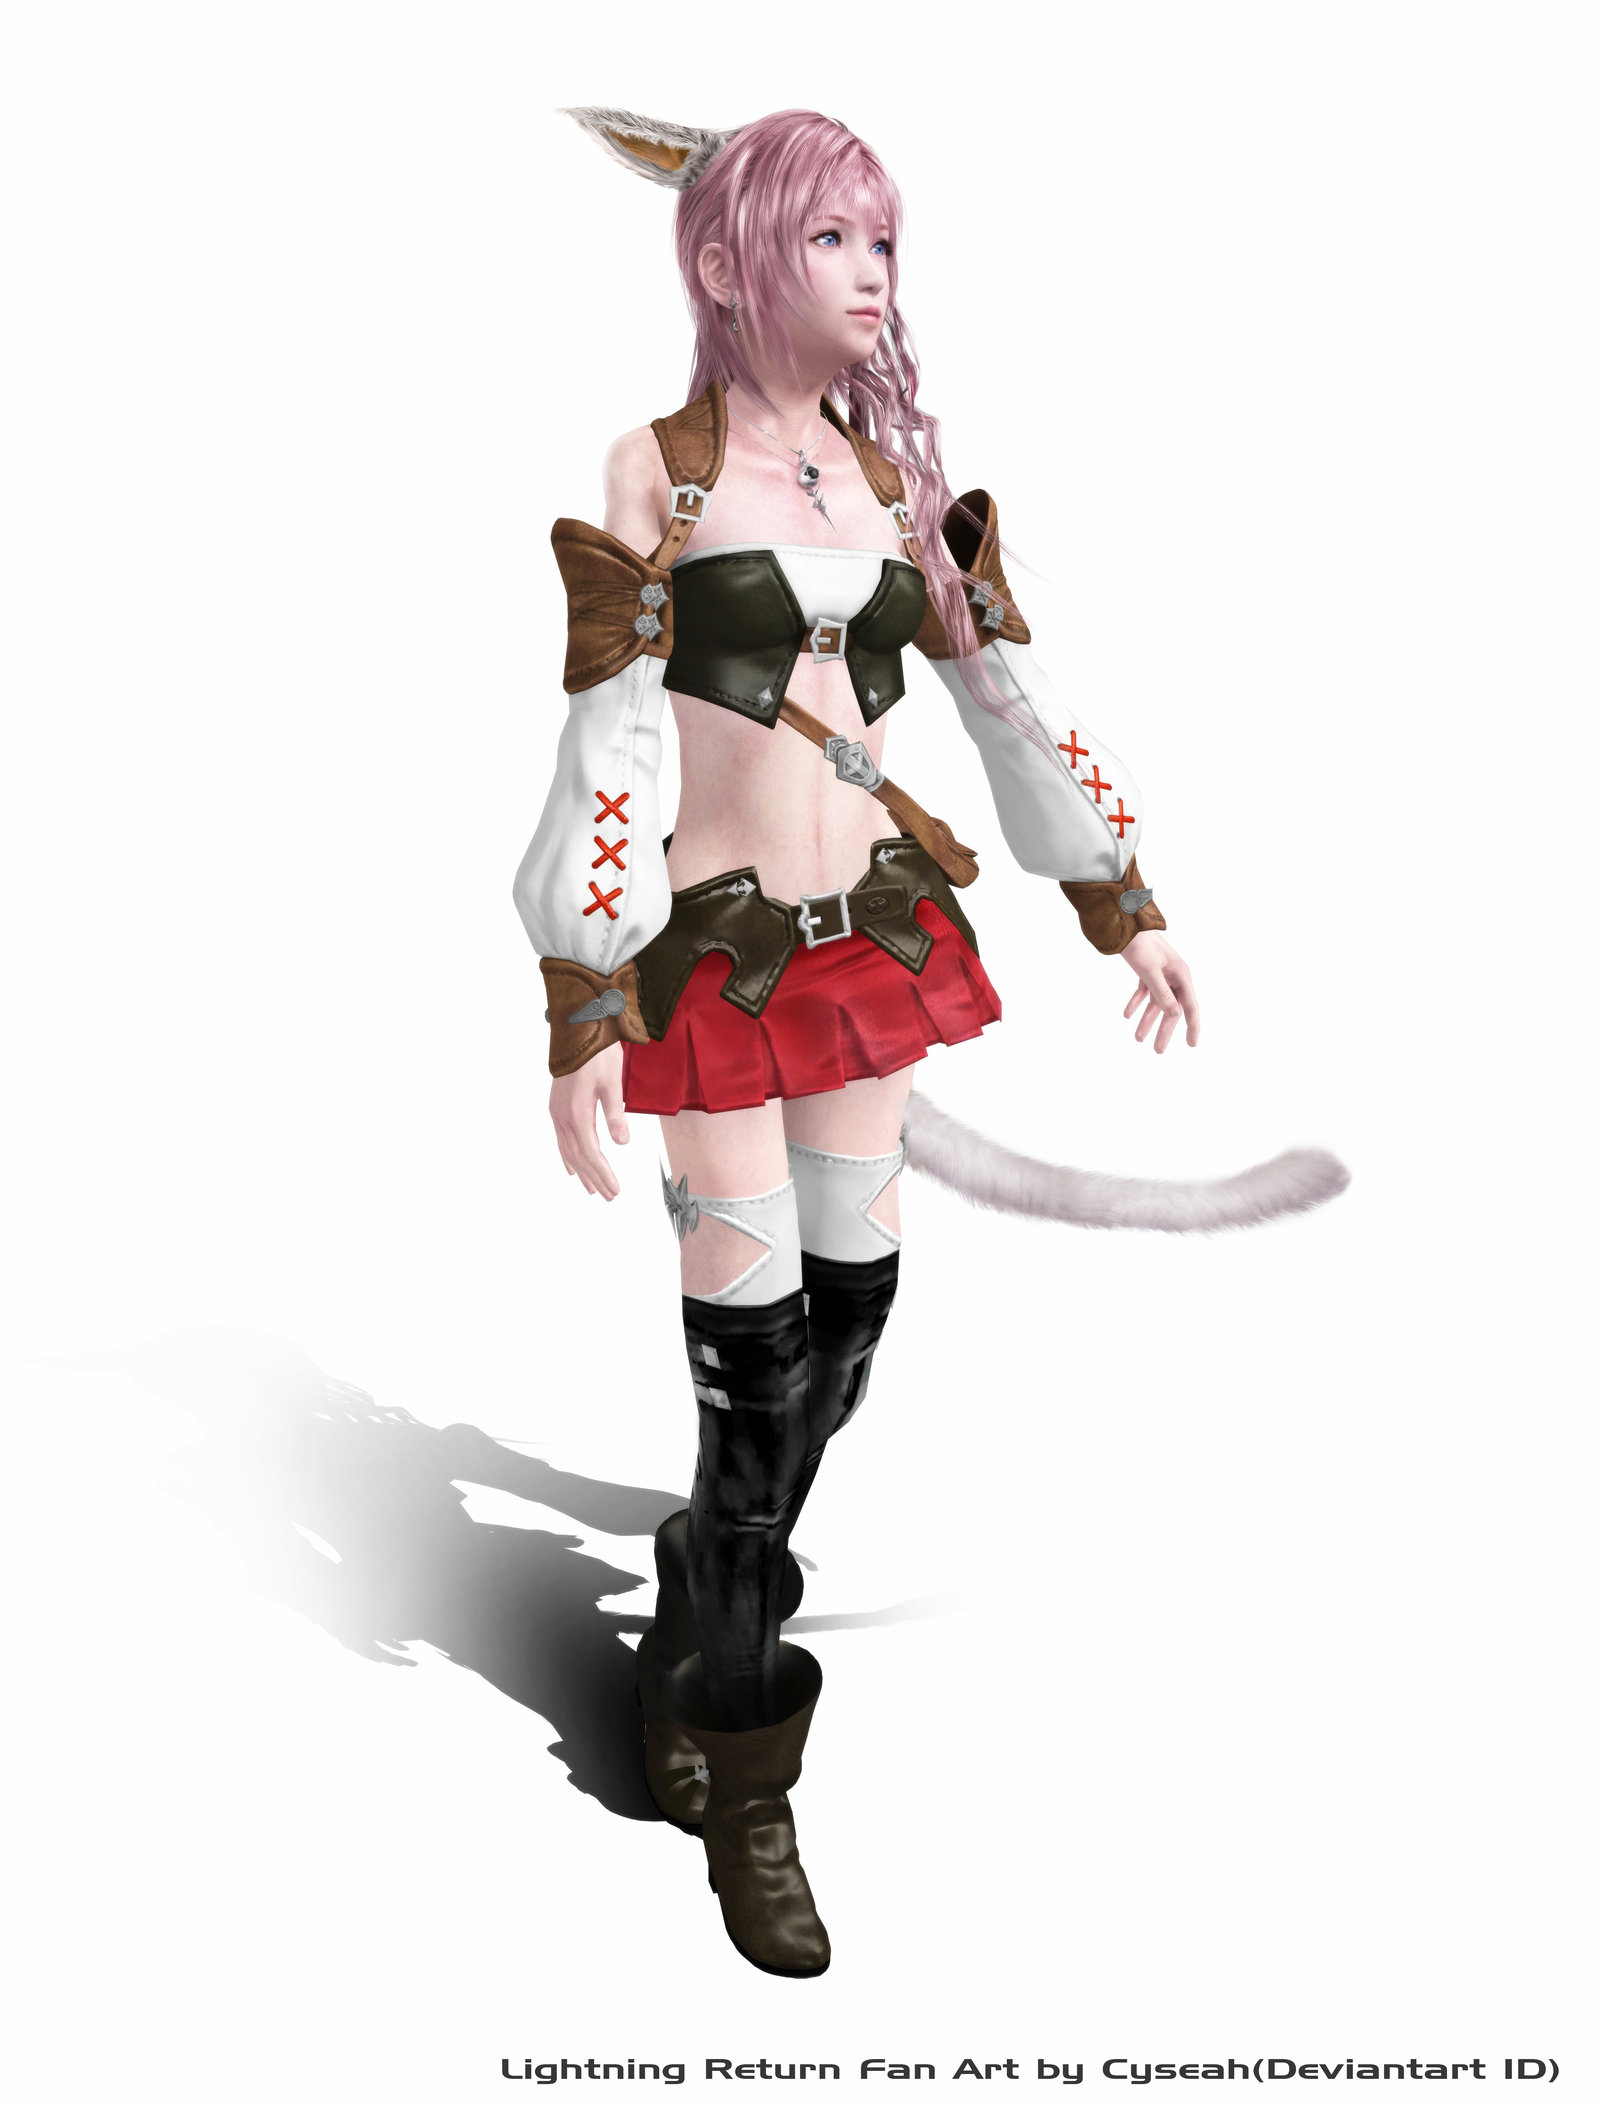 So I put Serah's cute and adorable face. 